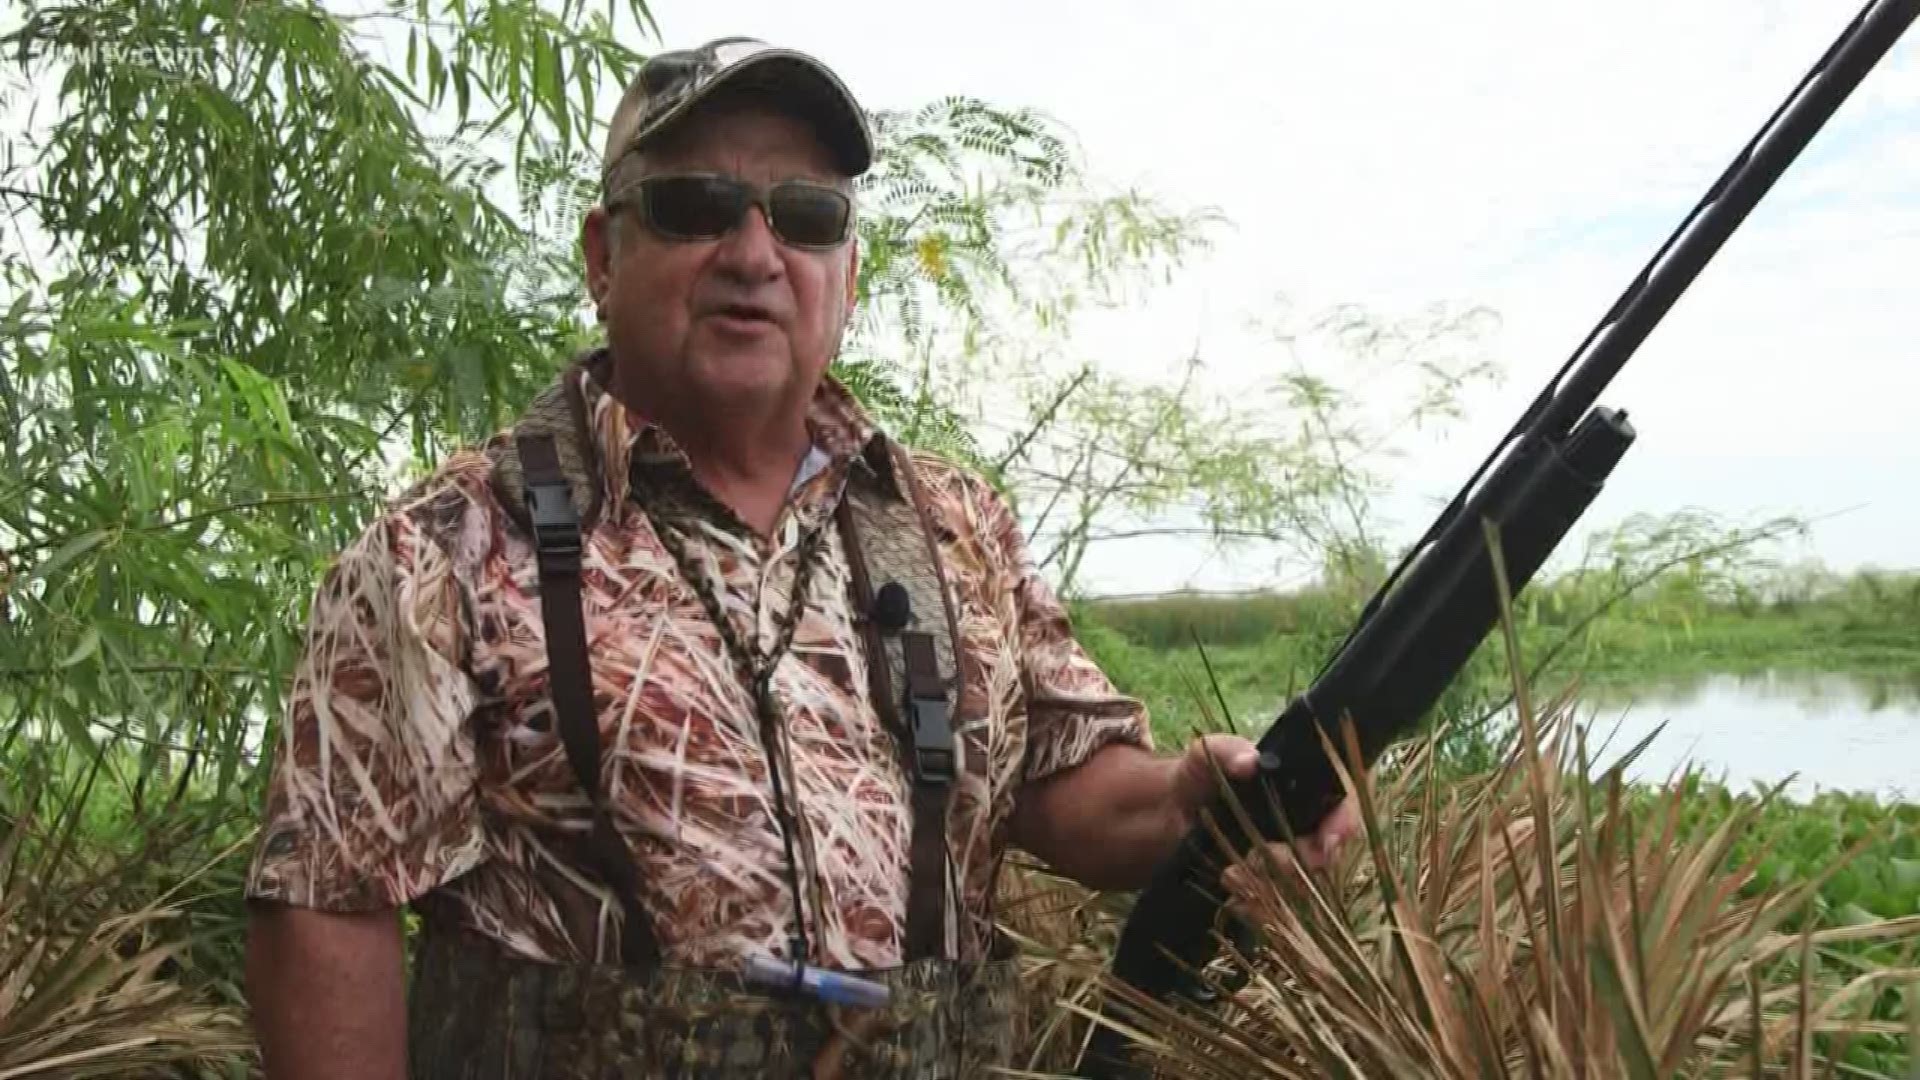 Outdoorsman Don Dubuc talks about the opening of teal season and has some important reminders for hunters.